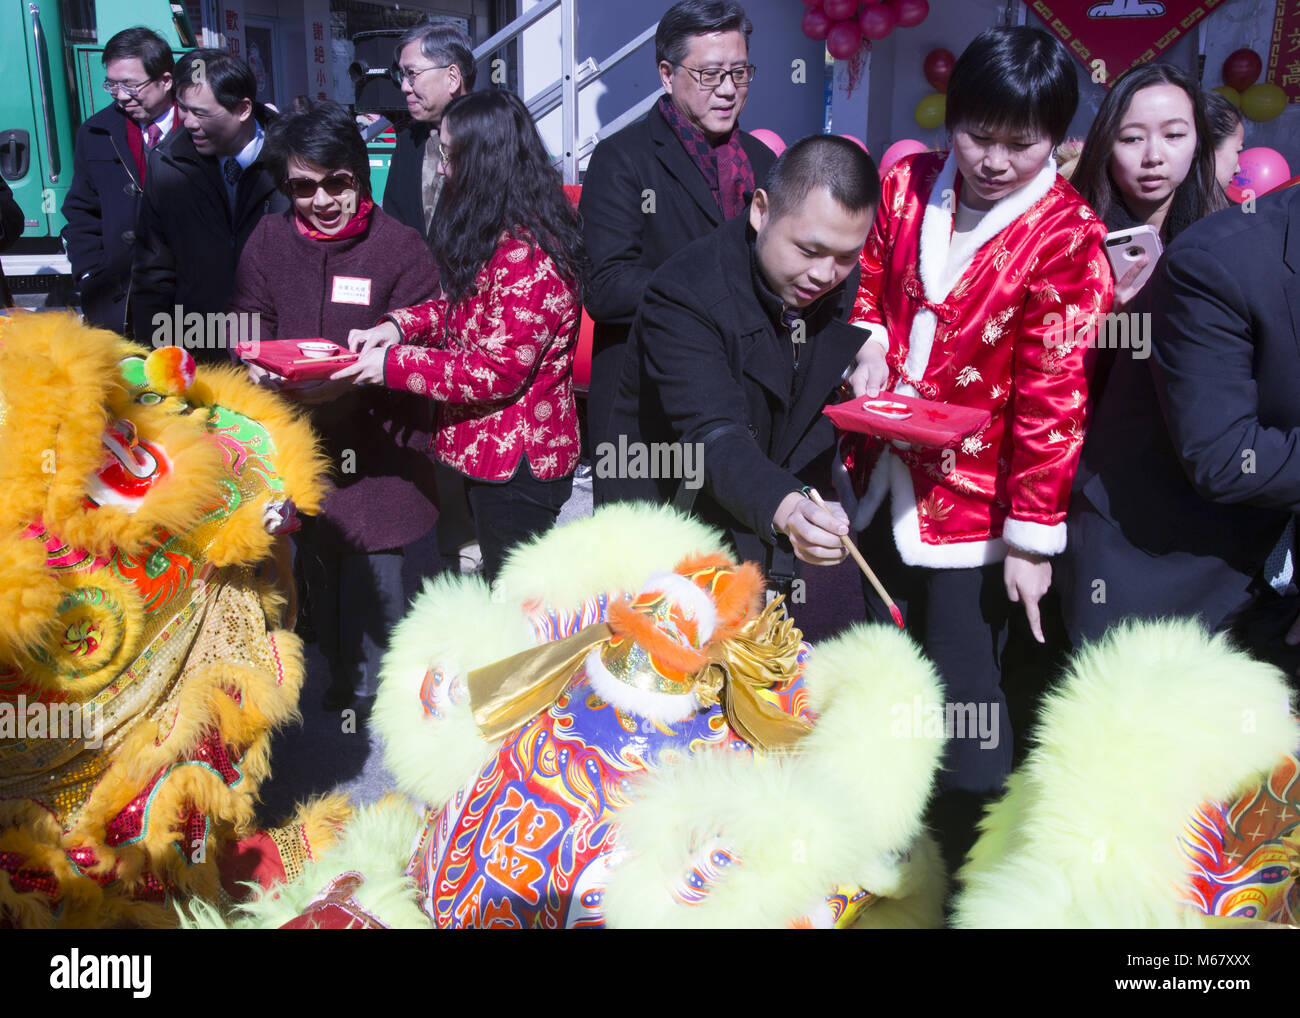 Chinese New Year, Brooklyn, NY. In traditional southern lion dance, before the ‘lions’ do their performances, the ‘animal’ must be blessed by an eye opening or eye dotting ceremony. The red color is used because the color is associated with fire, life and good luck or fortune. Stock Photo